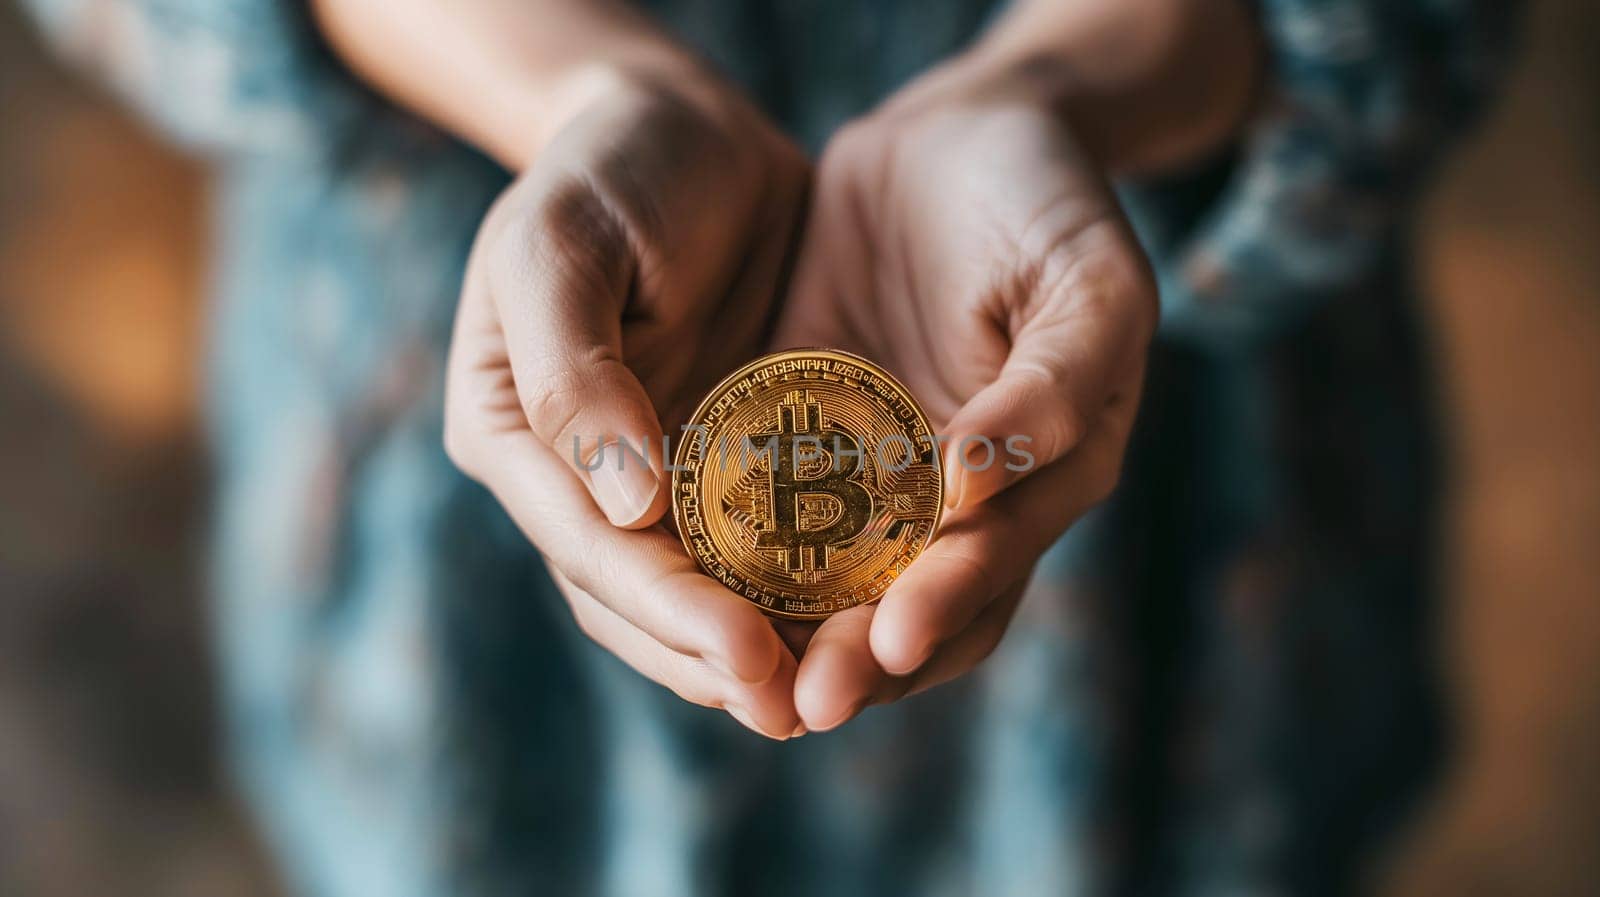 A person stands with open hands gently cradling a shiny Bitcoin token, symbolizing cryptocurrency investment and the digital economy - Generative AI